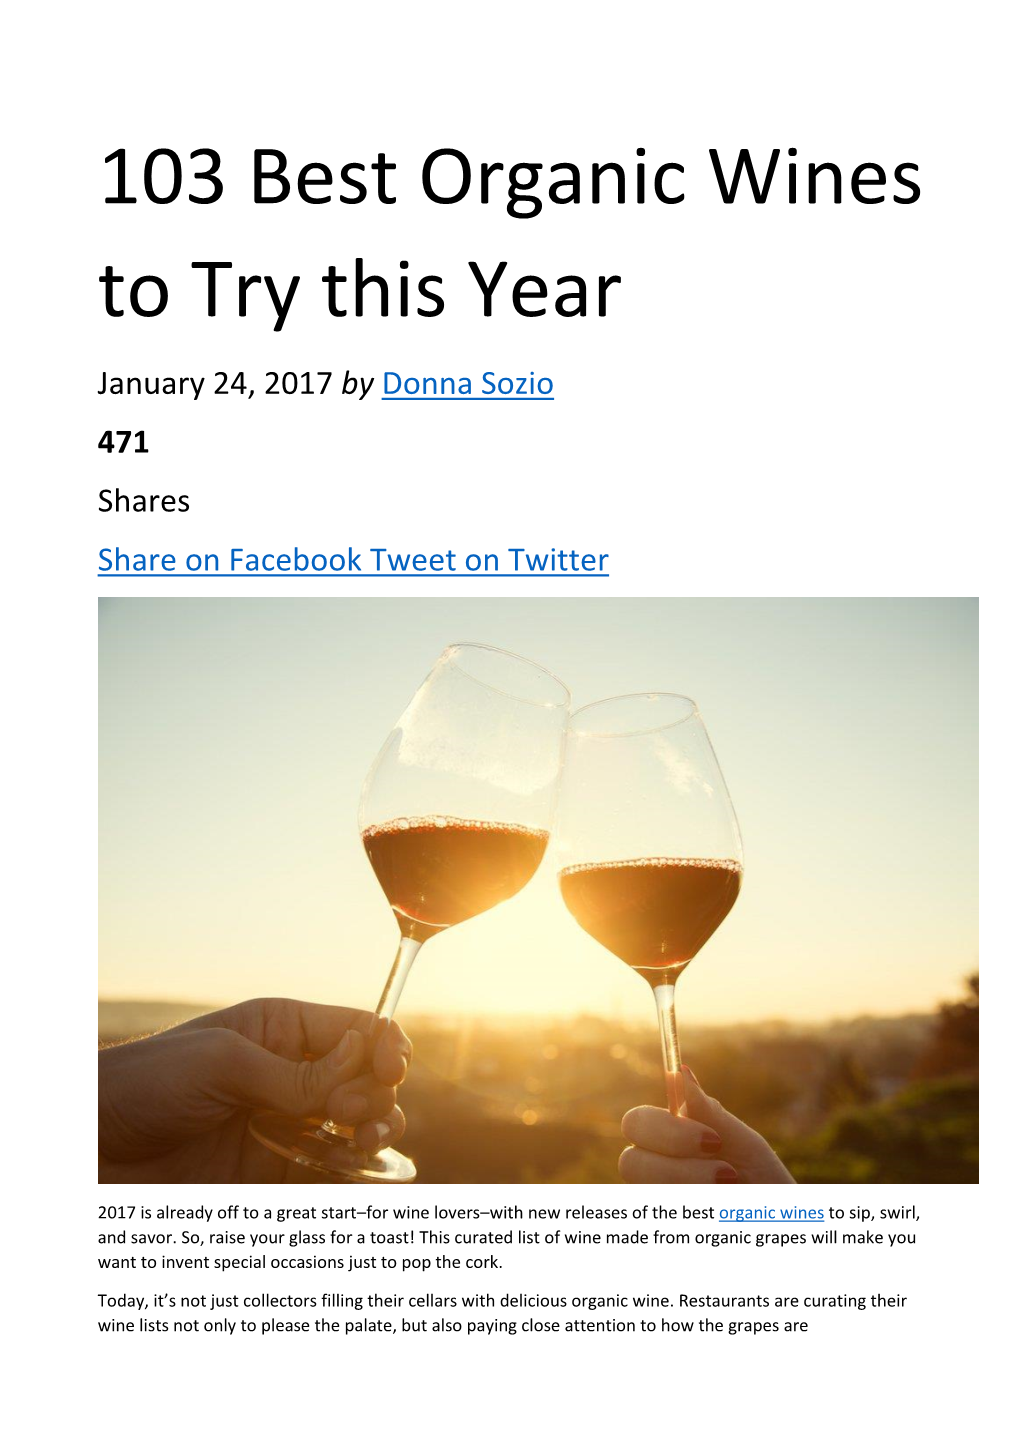 103 Best Organic Wines to Try This Year January 24, 2017 by Donna Sozio 471 Shares Share on Facebook Tweet on Twitter